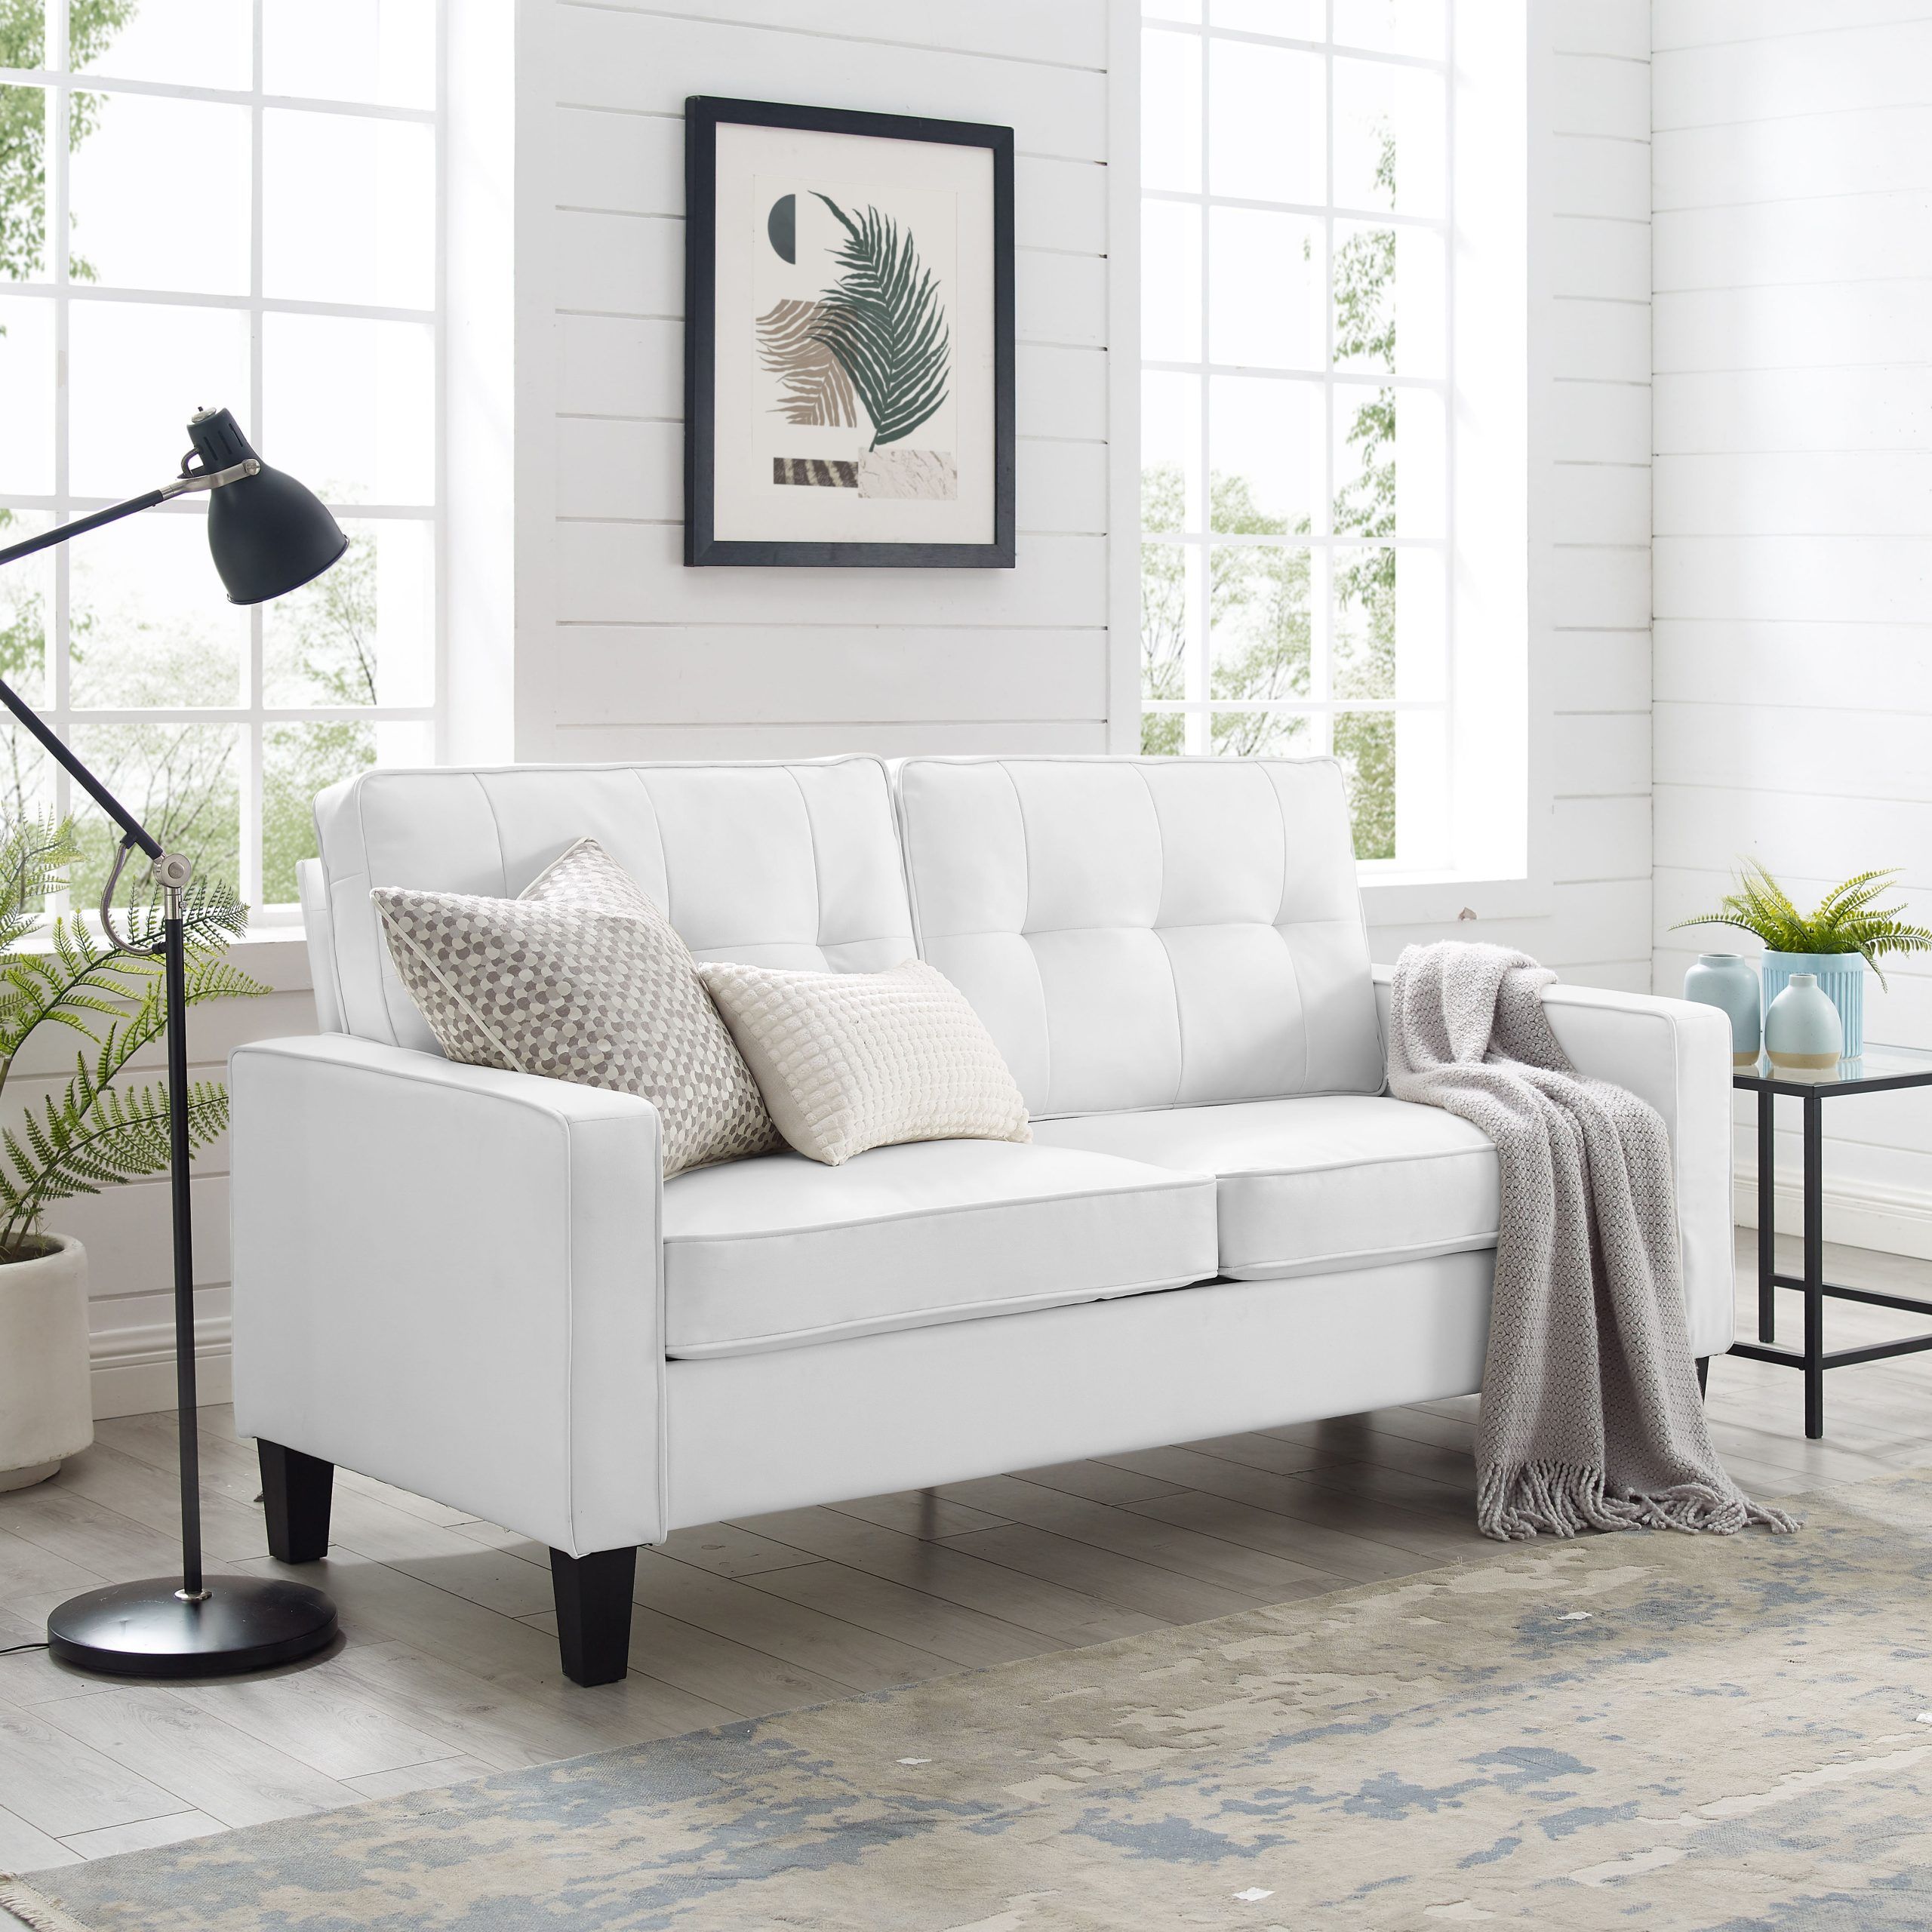 Mainstays Faux Leather Apartment Sofa White – Walmart – Walmart Pertaining To Faux Leather Sofas (Gallery 12 of 21)